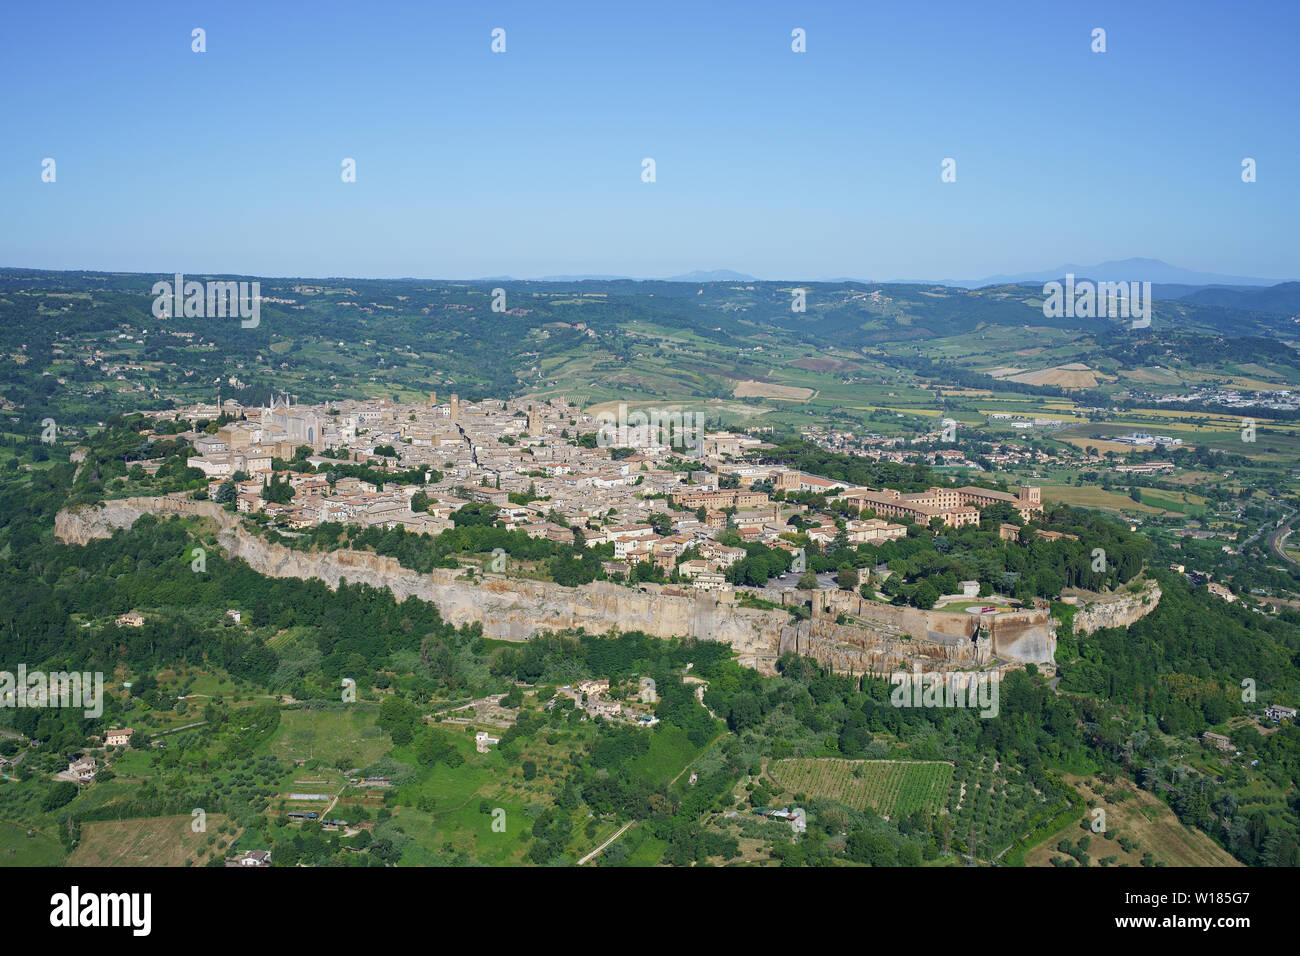 AERIAL VIEW. Medieval town built on a mesa of volcanic rock. Orvieto, Province of Terni, Umbria, Italy. Stock Photo